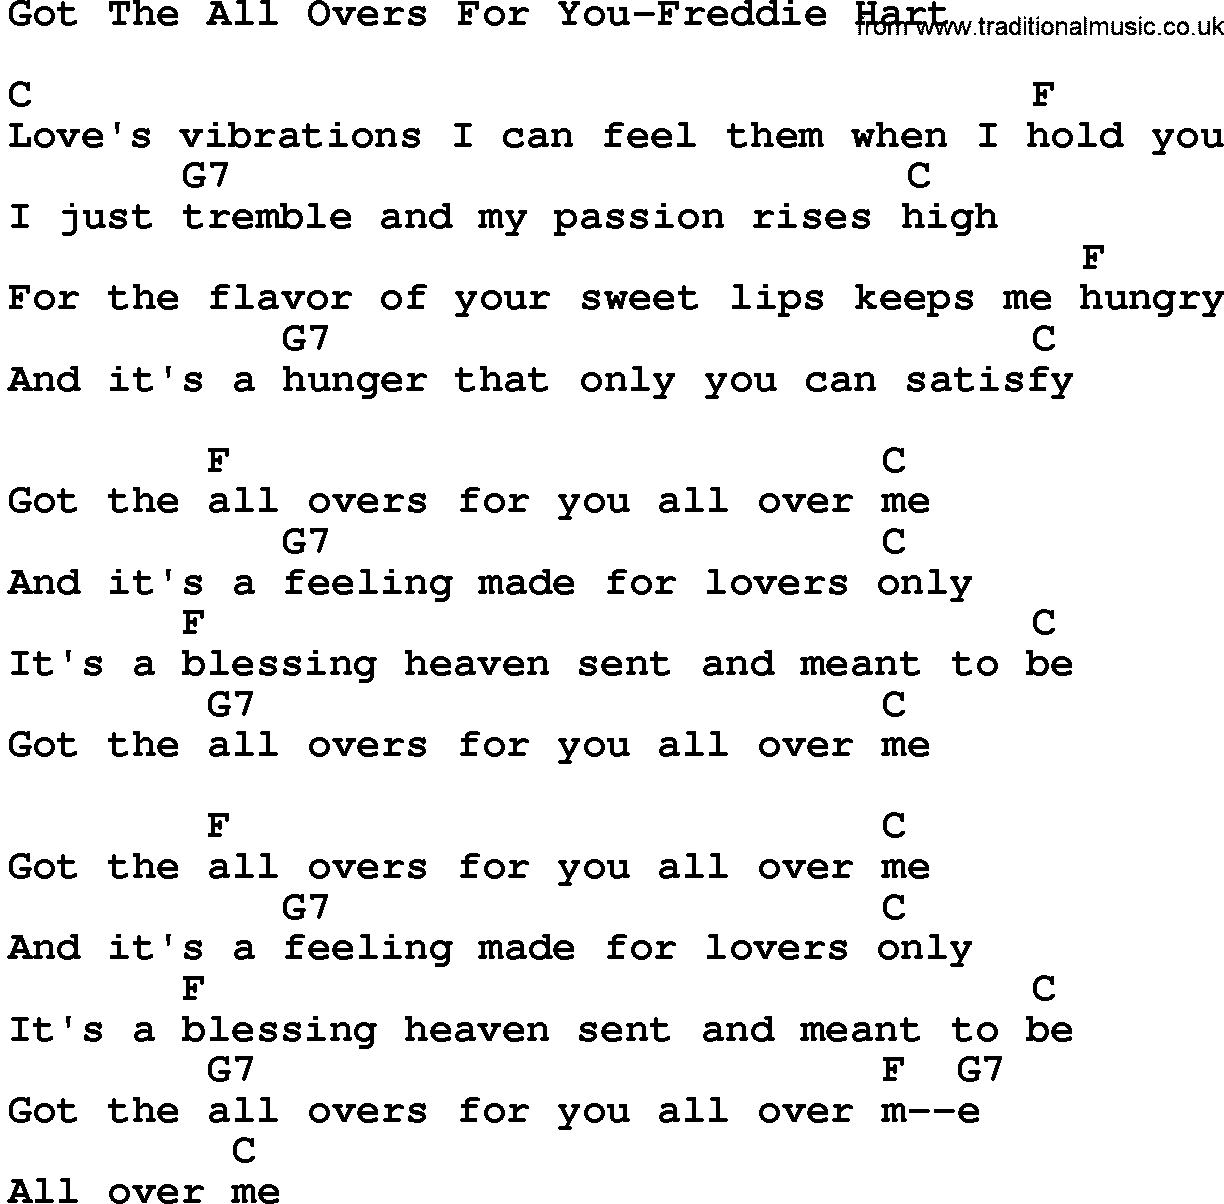 Country music song: Got The All Overs For You-Freddie Hart lyrics and chords